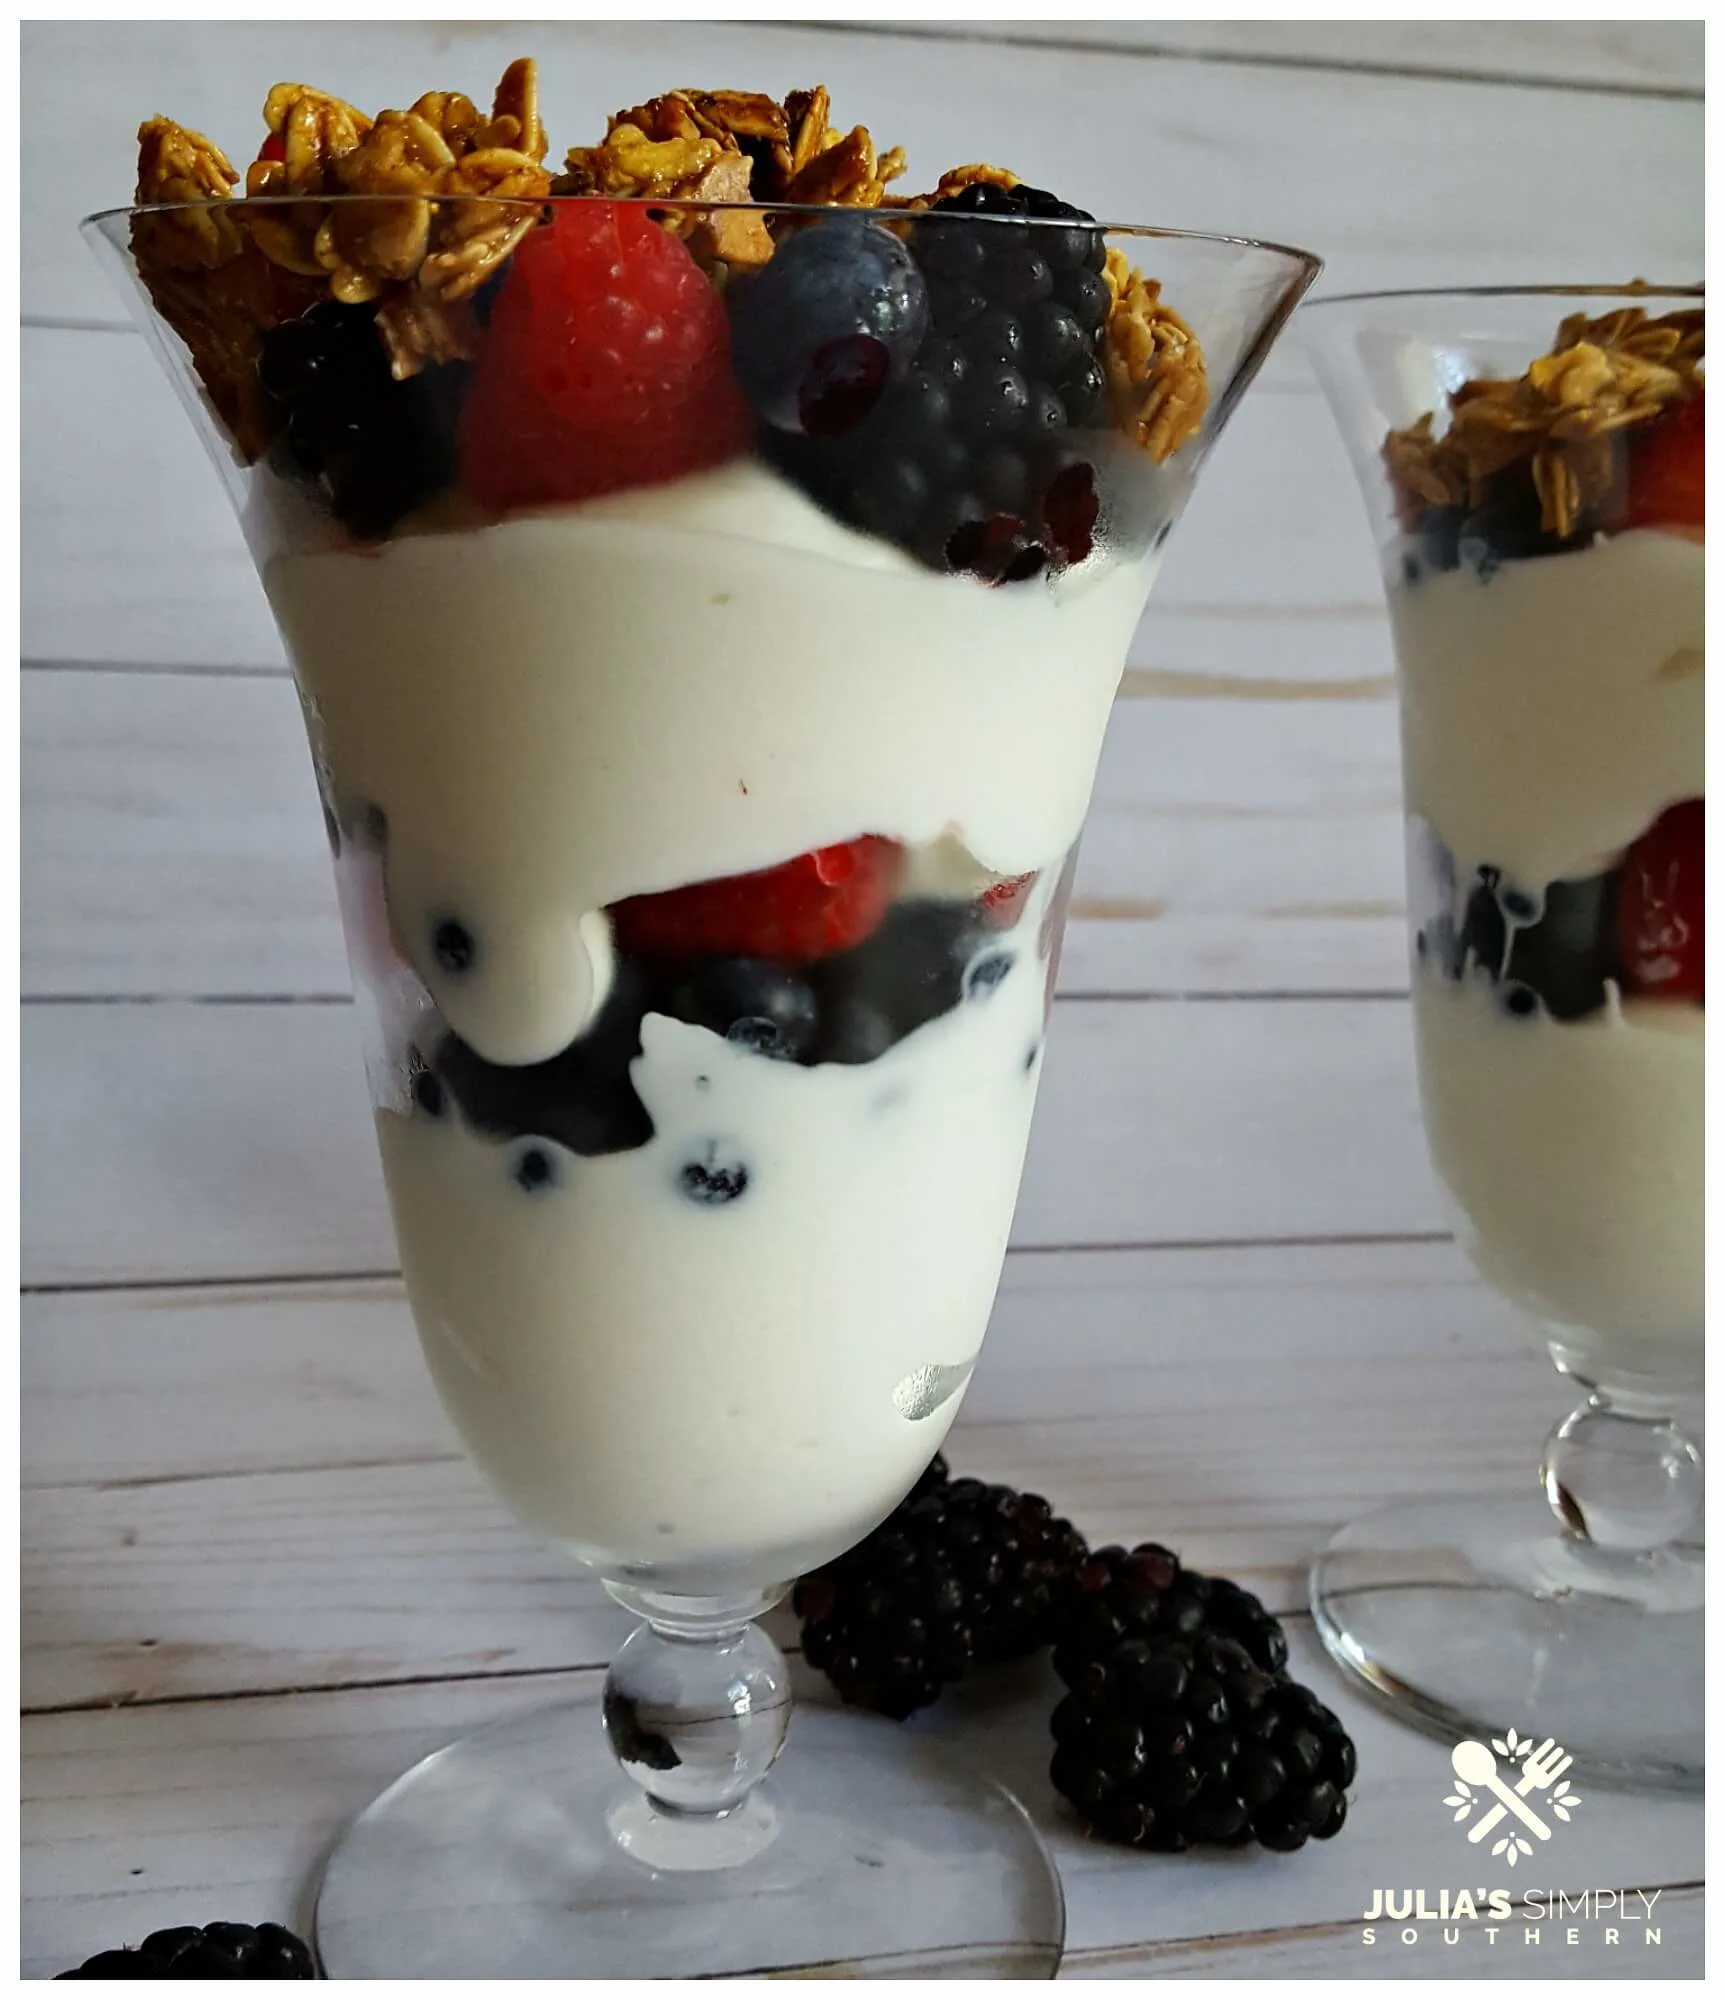 https://juliassimplysouthern.com/wp-content/uploads/Cover-2-Easy-Fruit-Parfait-breakfast-lunch-snack-healthy-granola-yogurt-Julias-Simply-Southern.jpg.webp